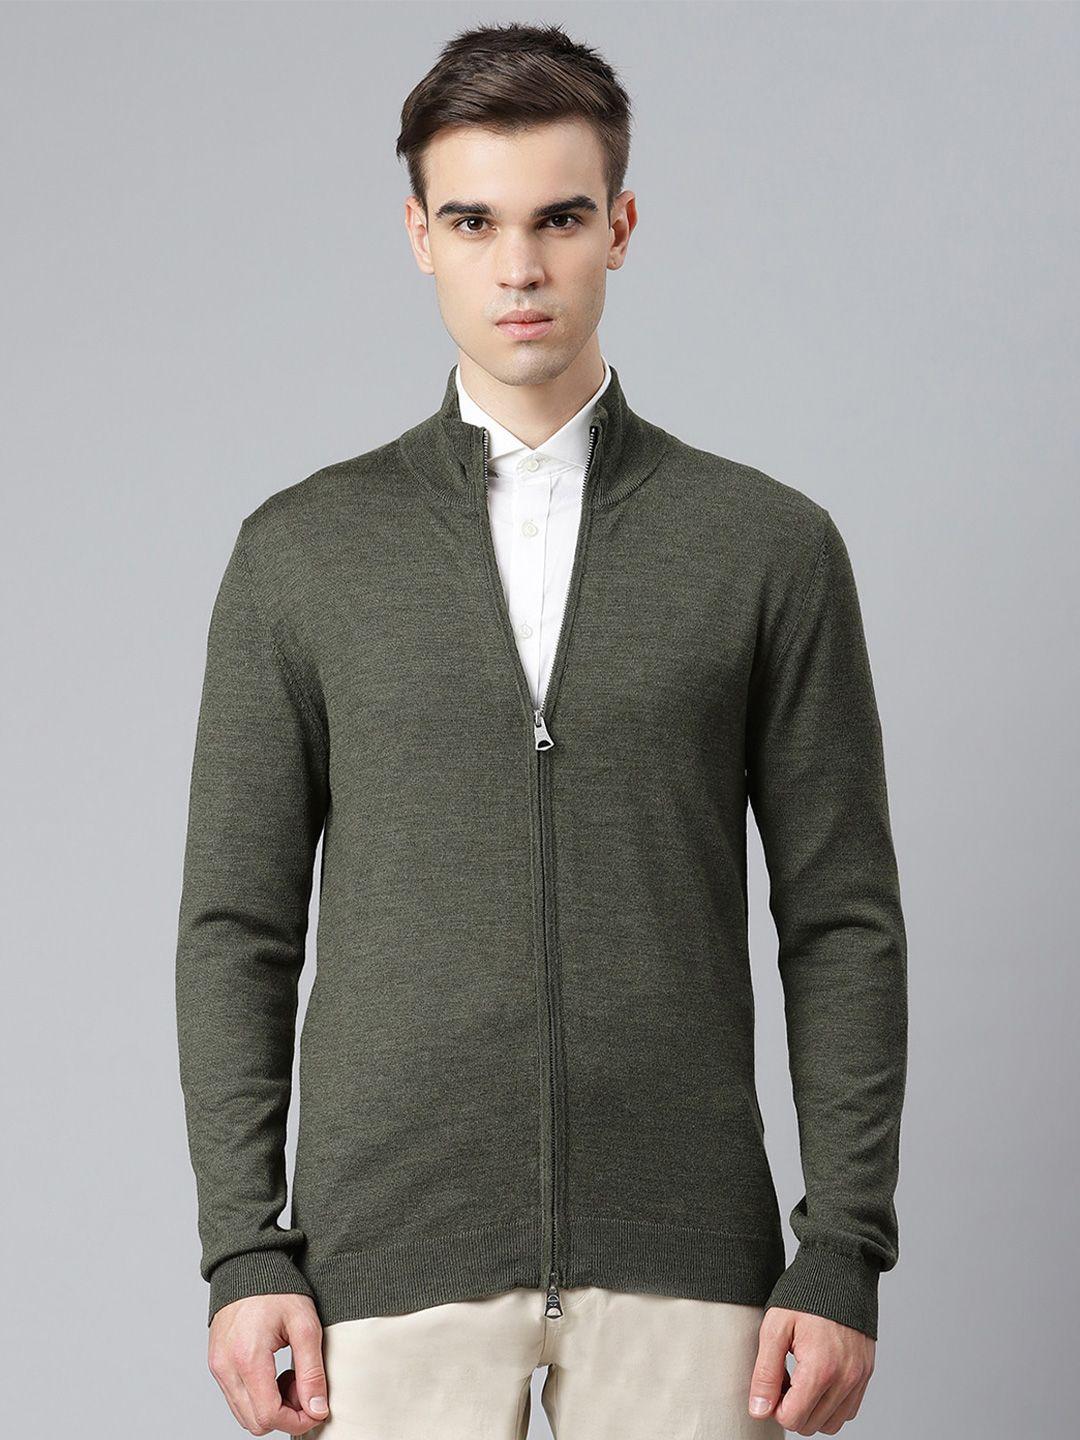 matinique-men-olive-green-front-open-sweater